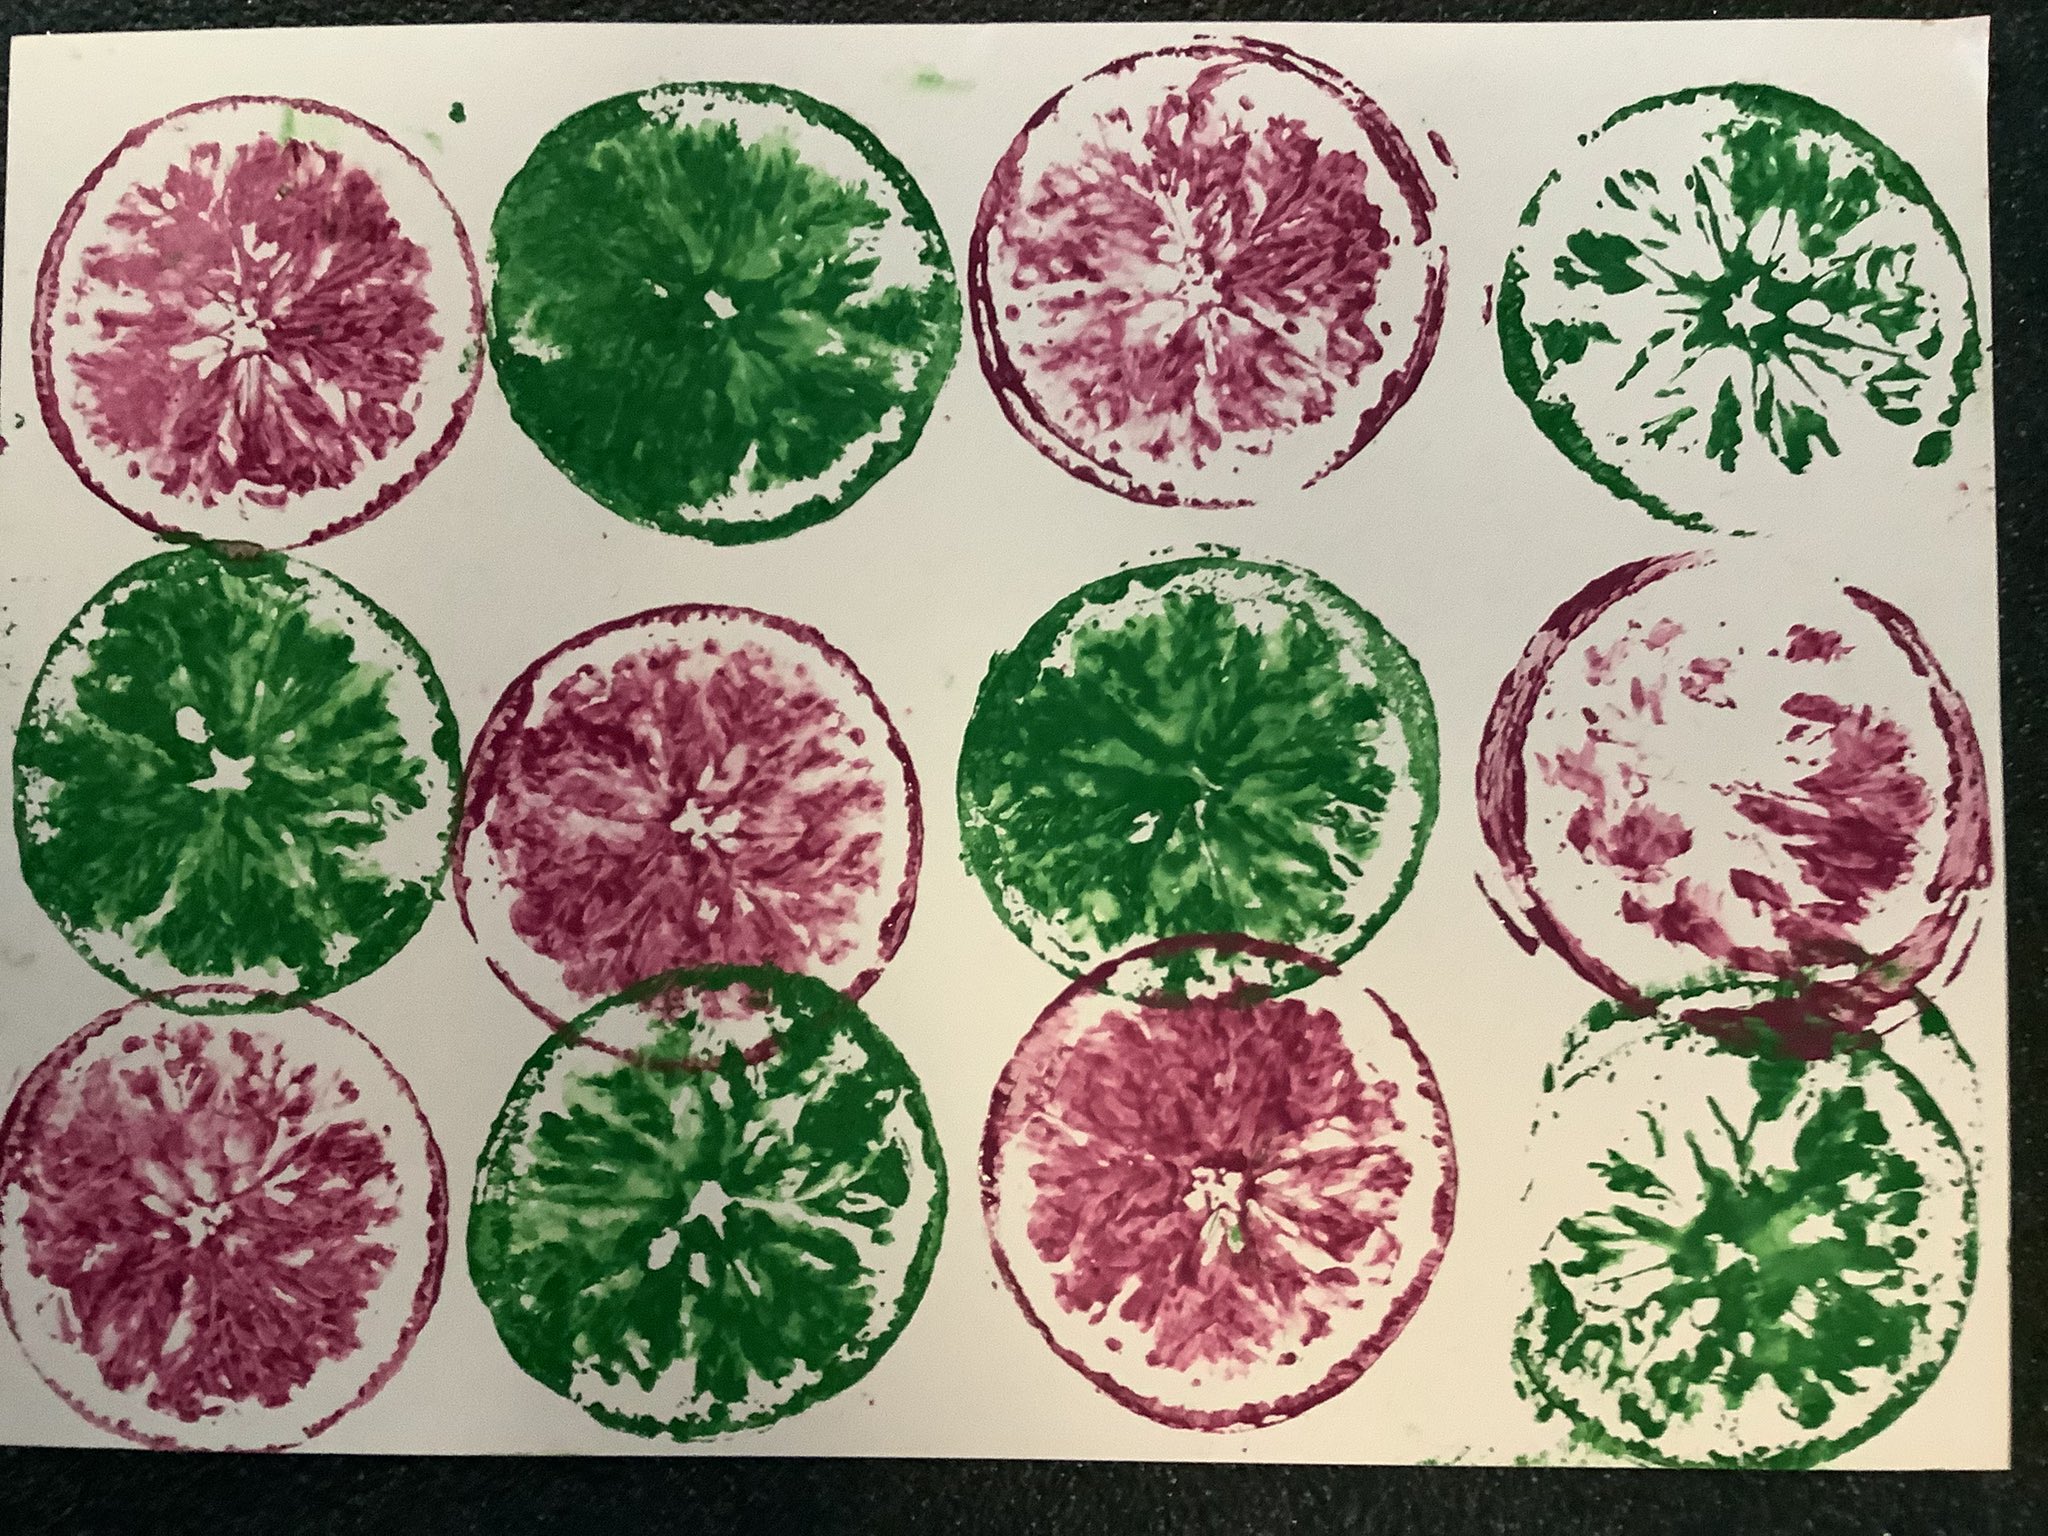 Mallard Primary School on Twitter: "Year 1 have been using fruit and  vegetables to print their repeating patterns. https://t.co/LYWcVrv2BJ" /  Twitter